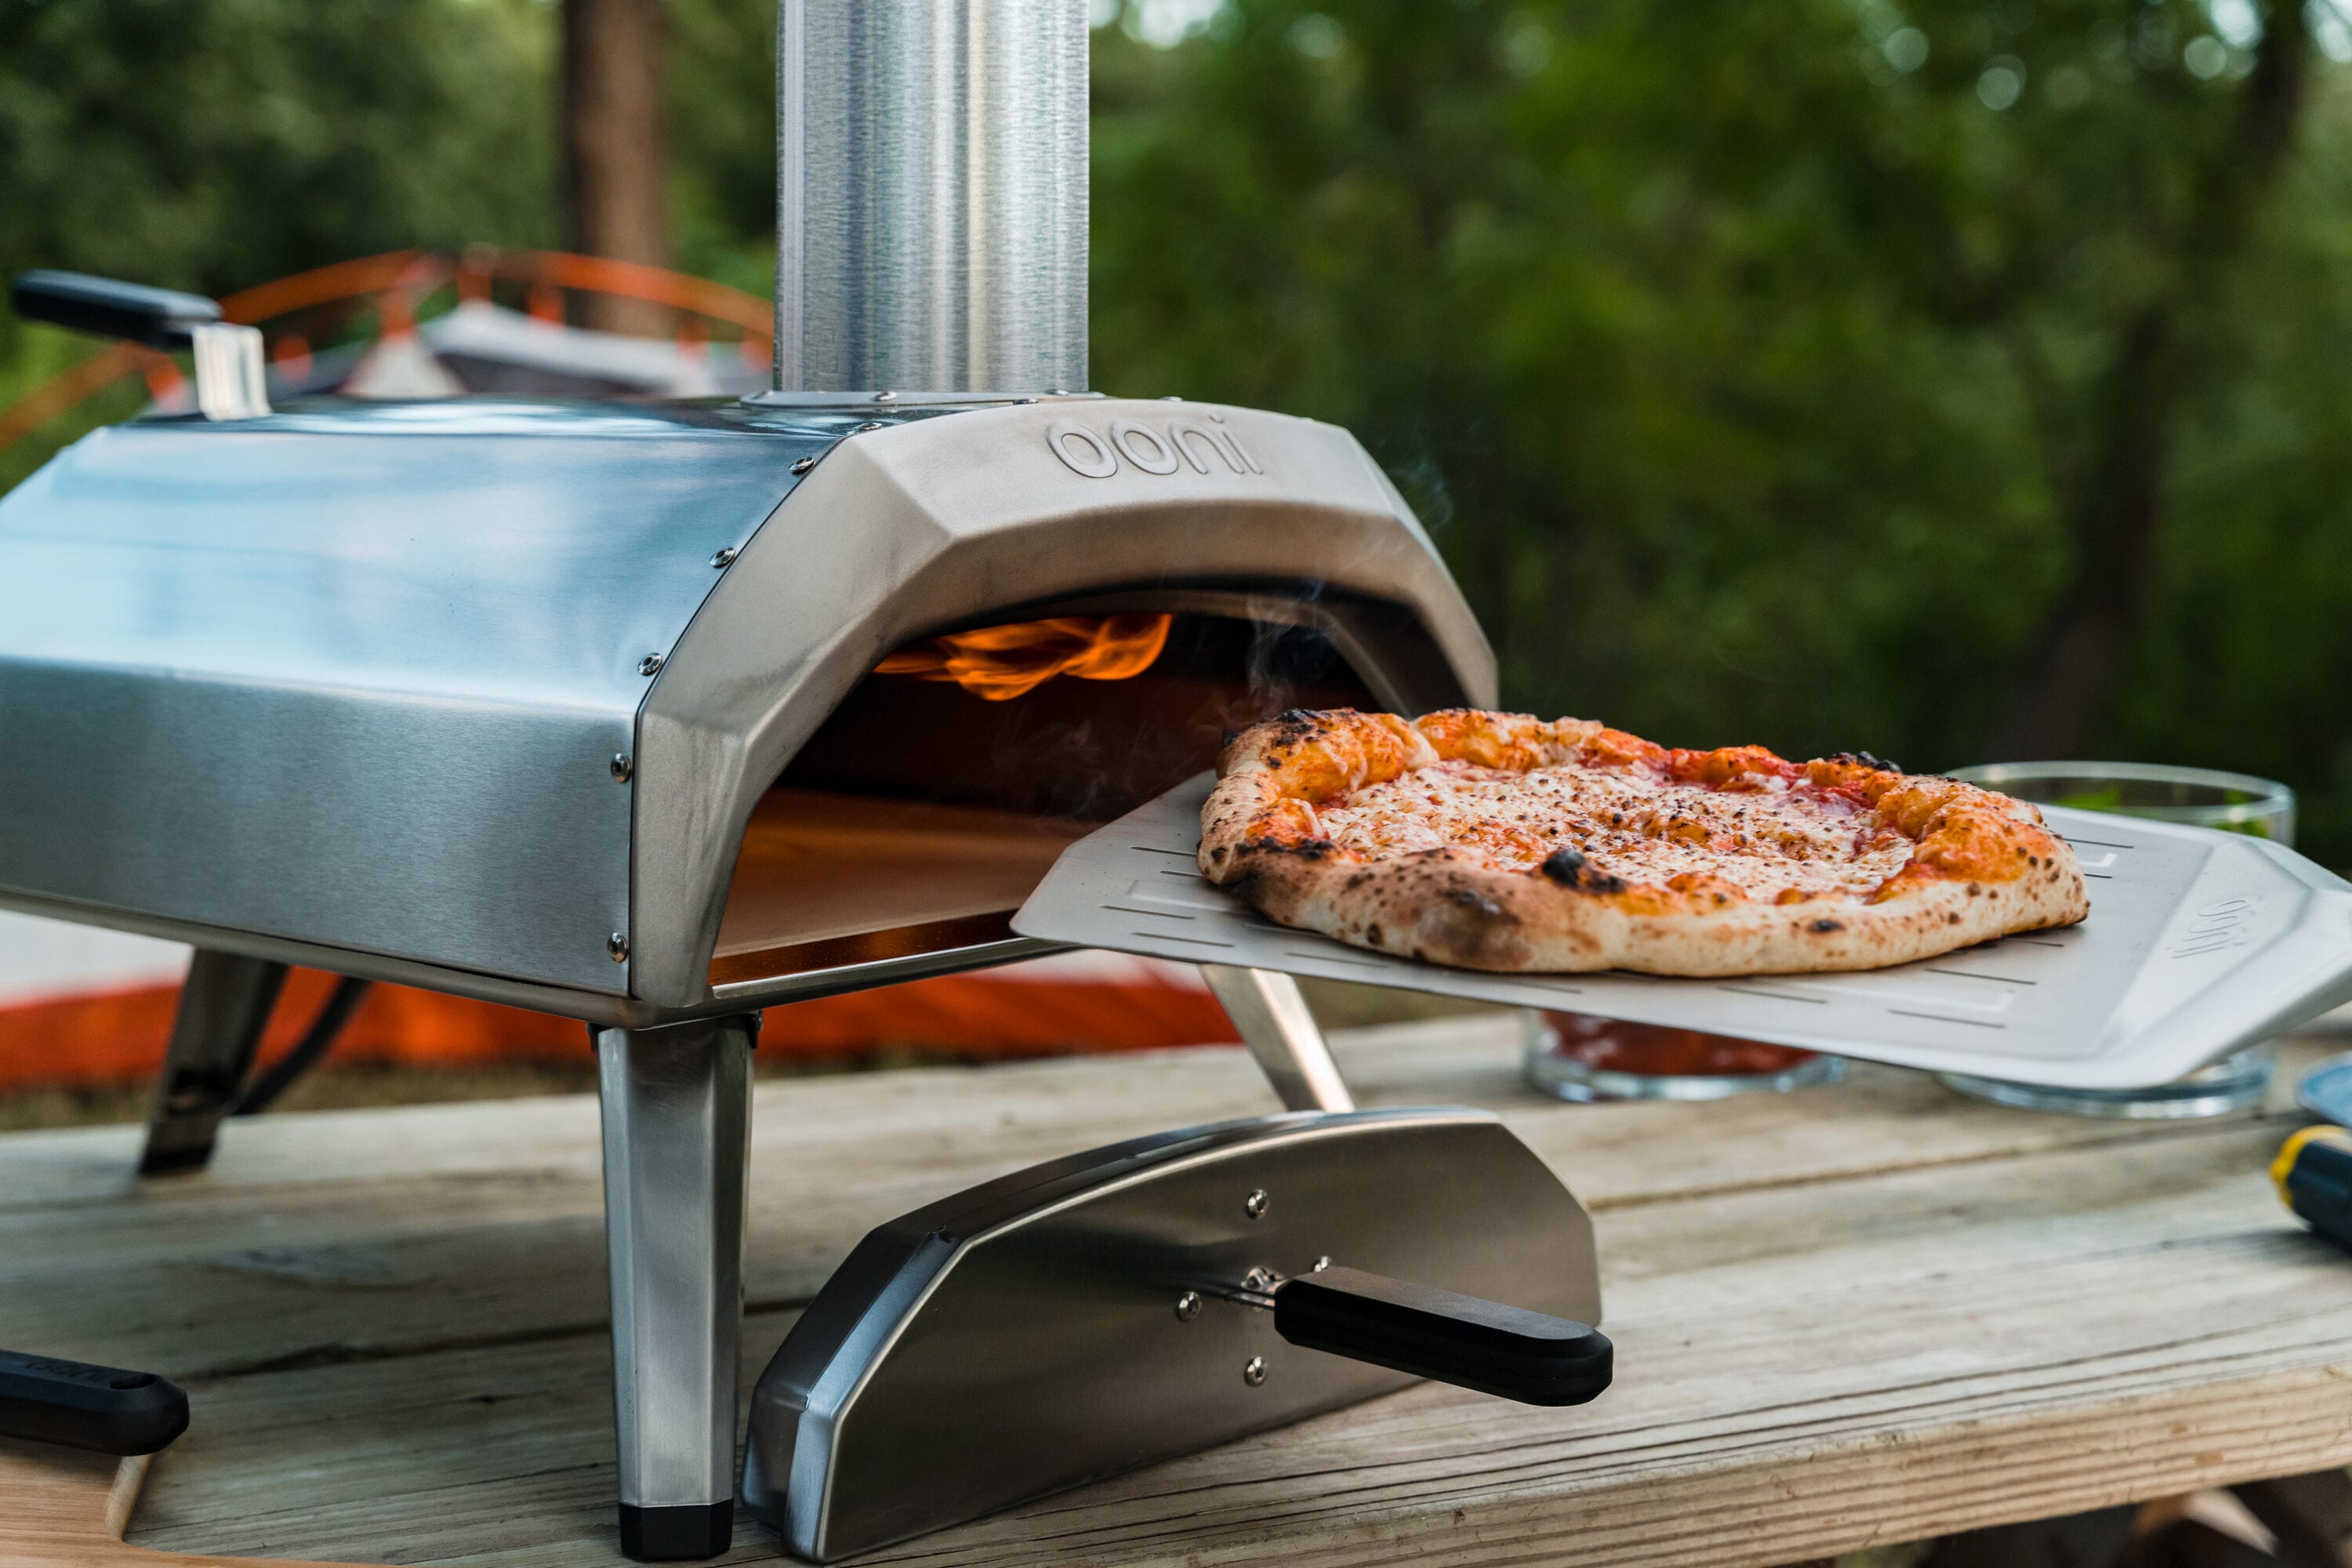 Ooni Karu 12 Multi-Fuel Powered Portable Outdoor Pizza Oven - UU-P0A100